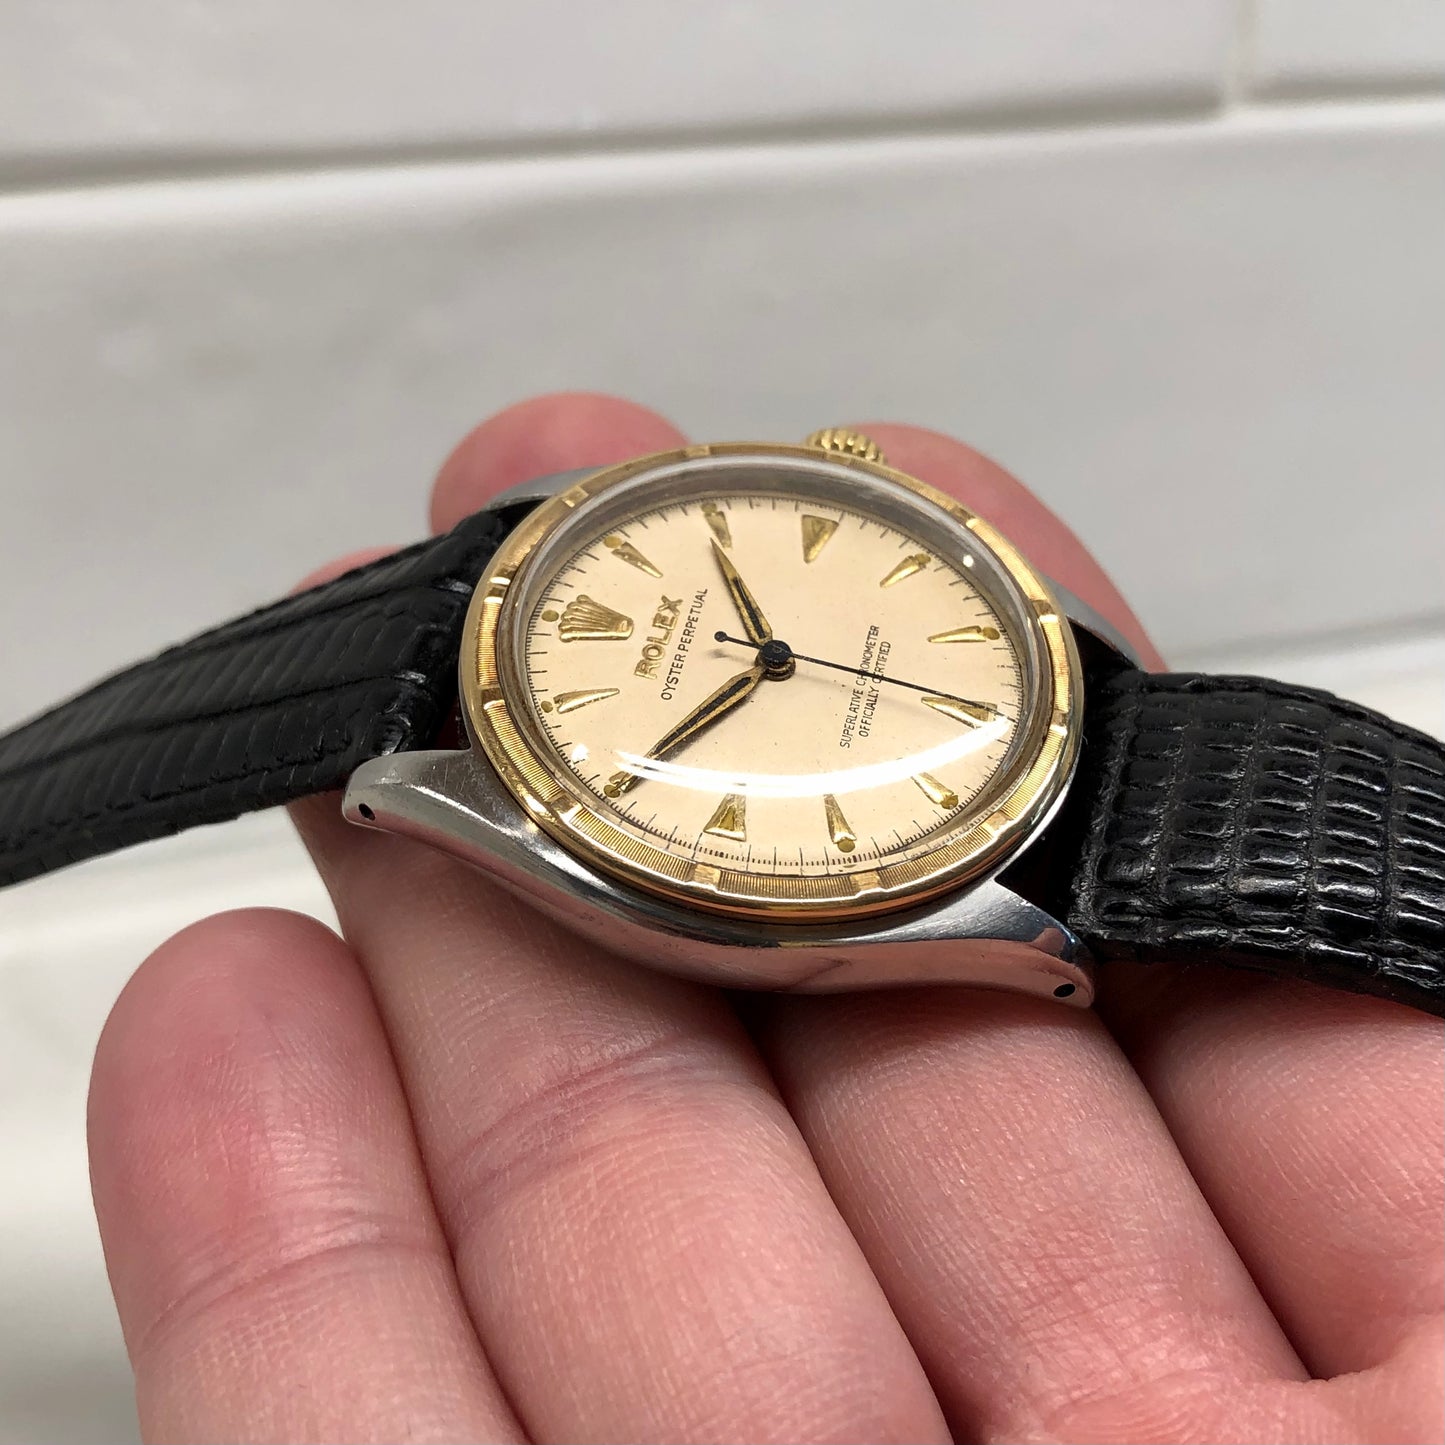 1953 Vintage Rolex 6103 Oyster Perpetual Ovettone Stainless Steel Gold Engine Turned Bezel Wristwatch - Hashtag Watch Company